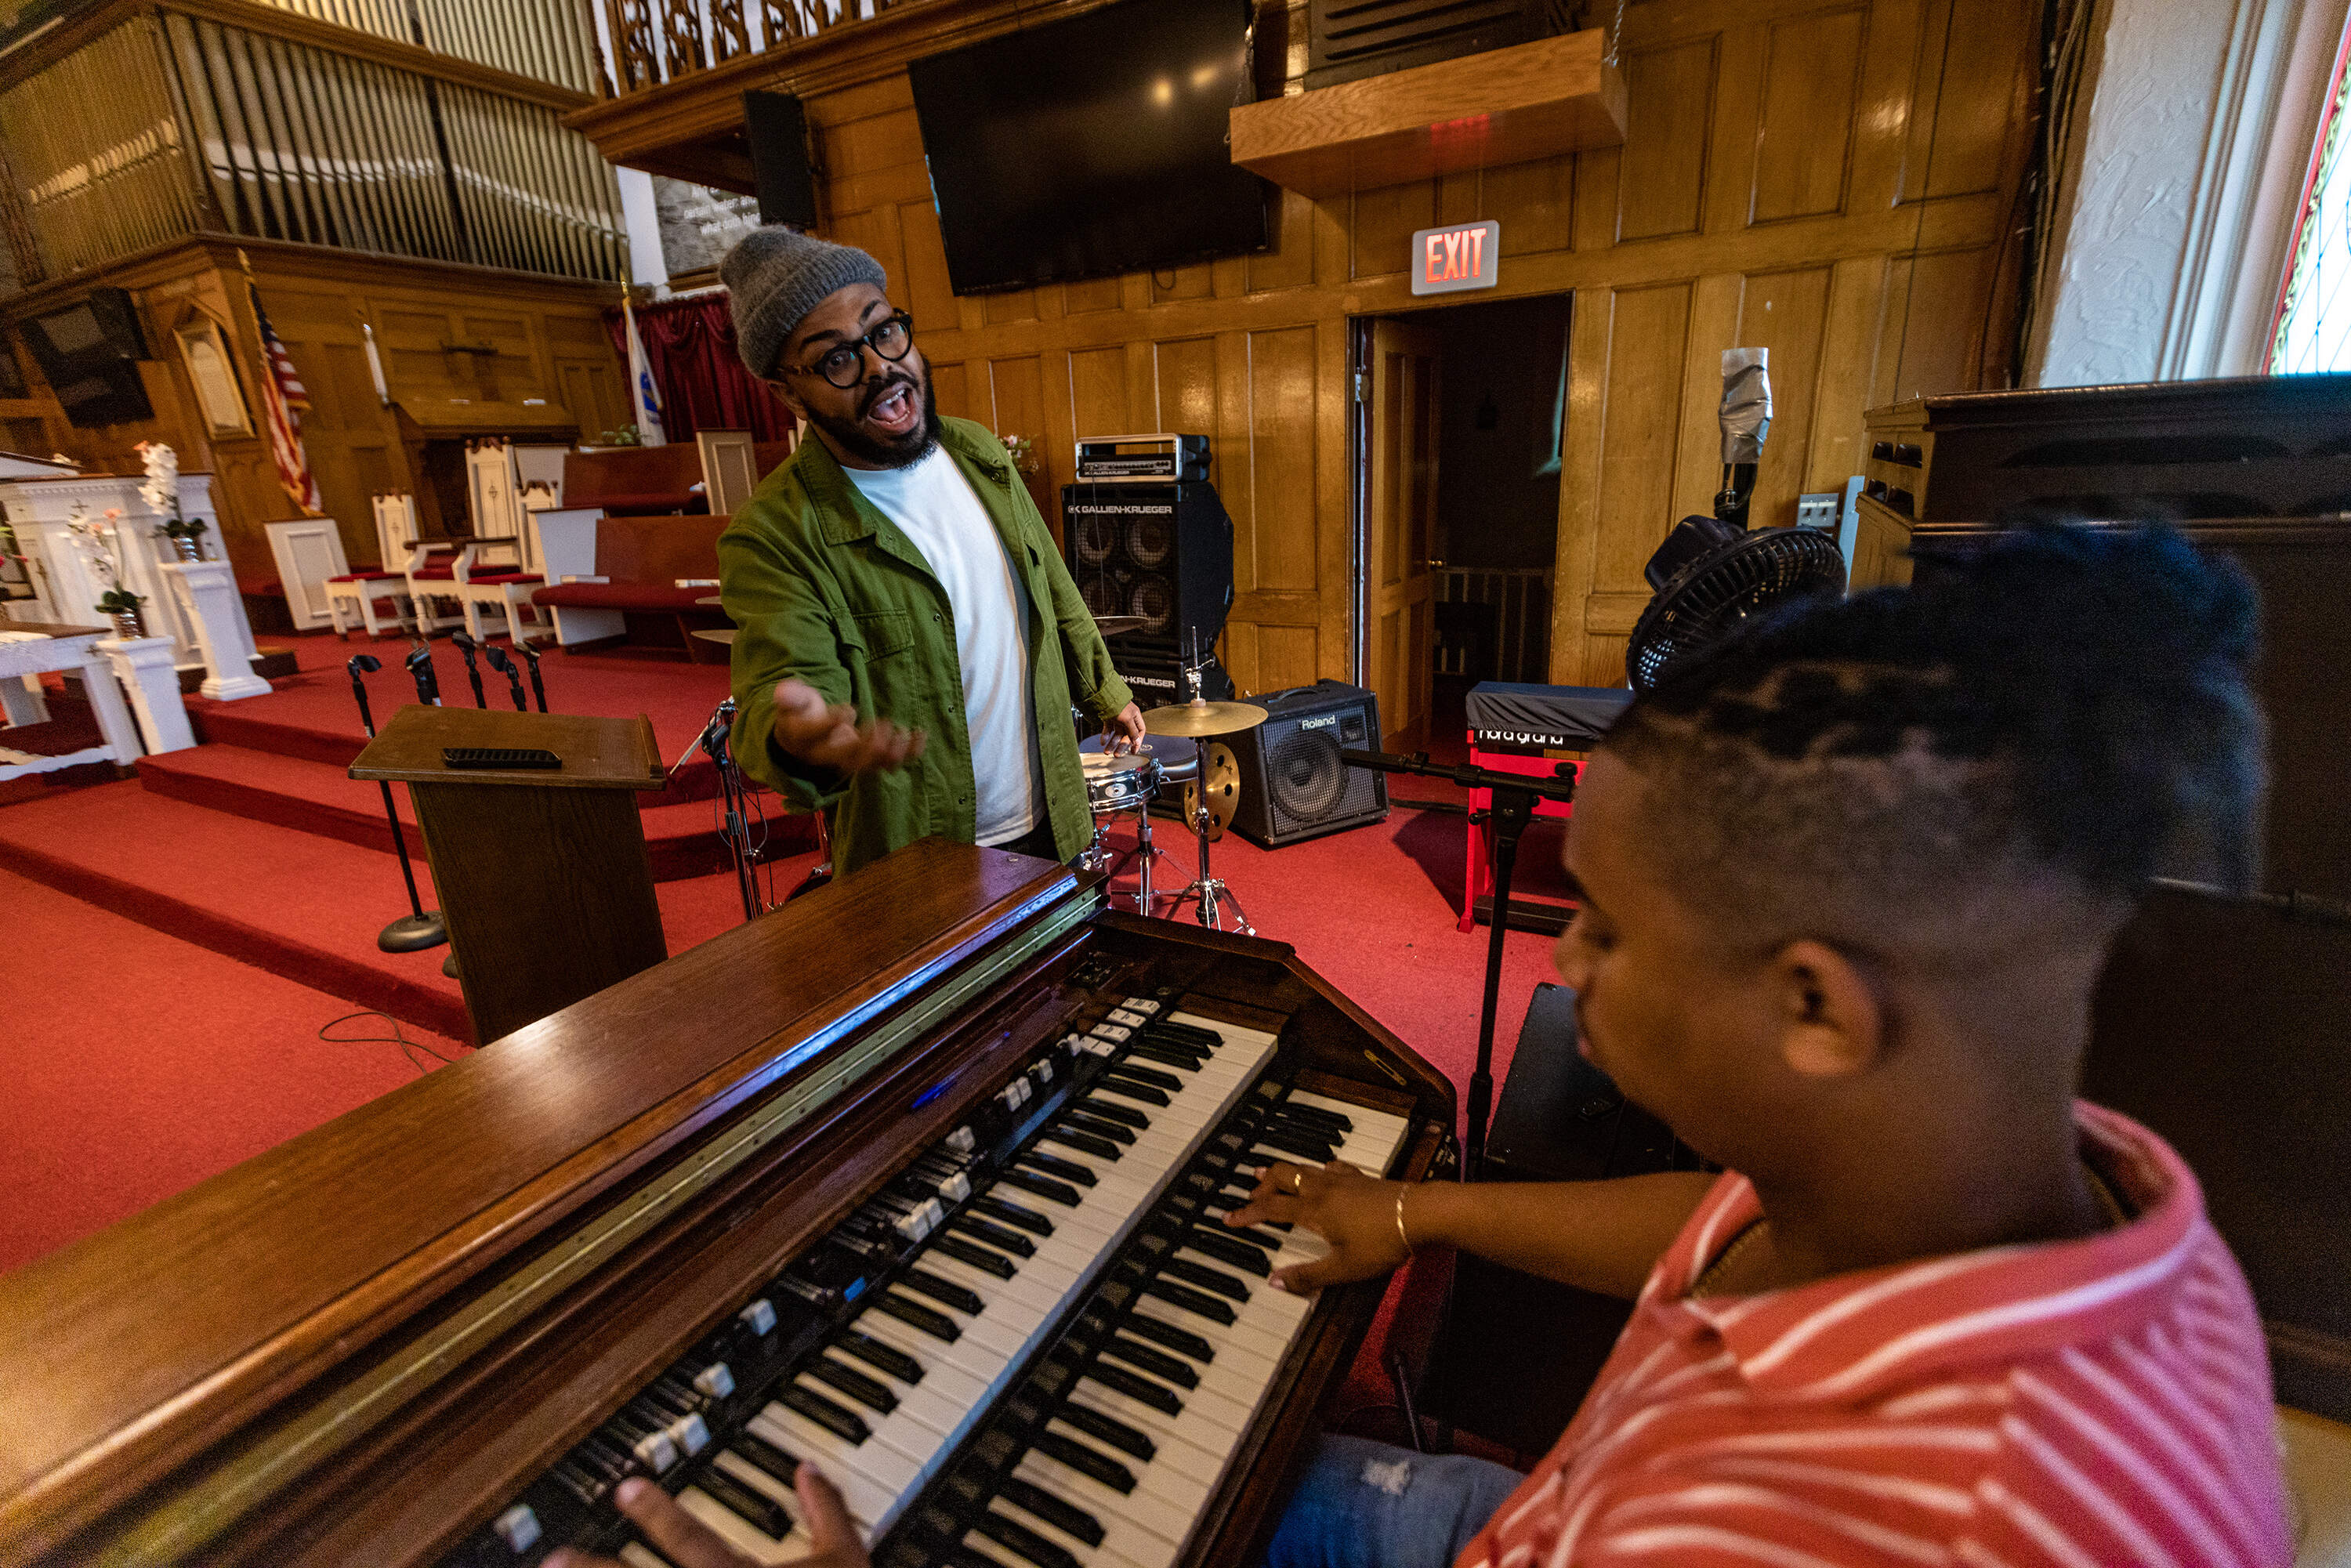 Singer Danny Rivera and organist Gavin Rushing perform at the Holy Tabernacle Church in Dorchester. (Jesse Costa/WBUR)